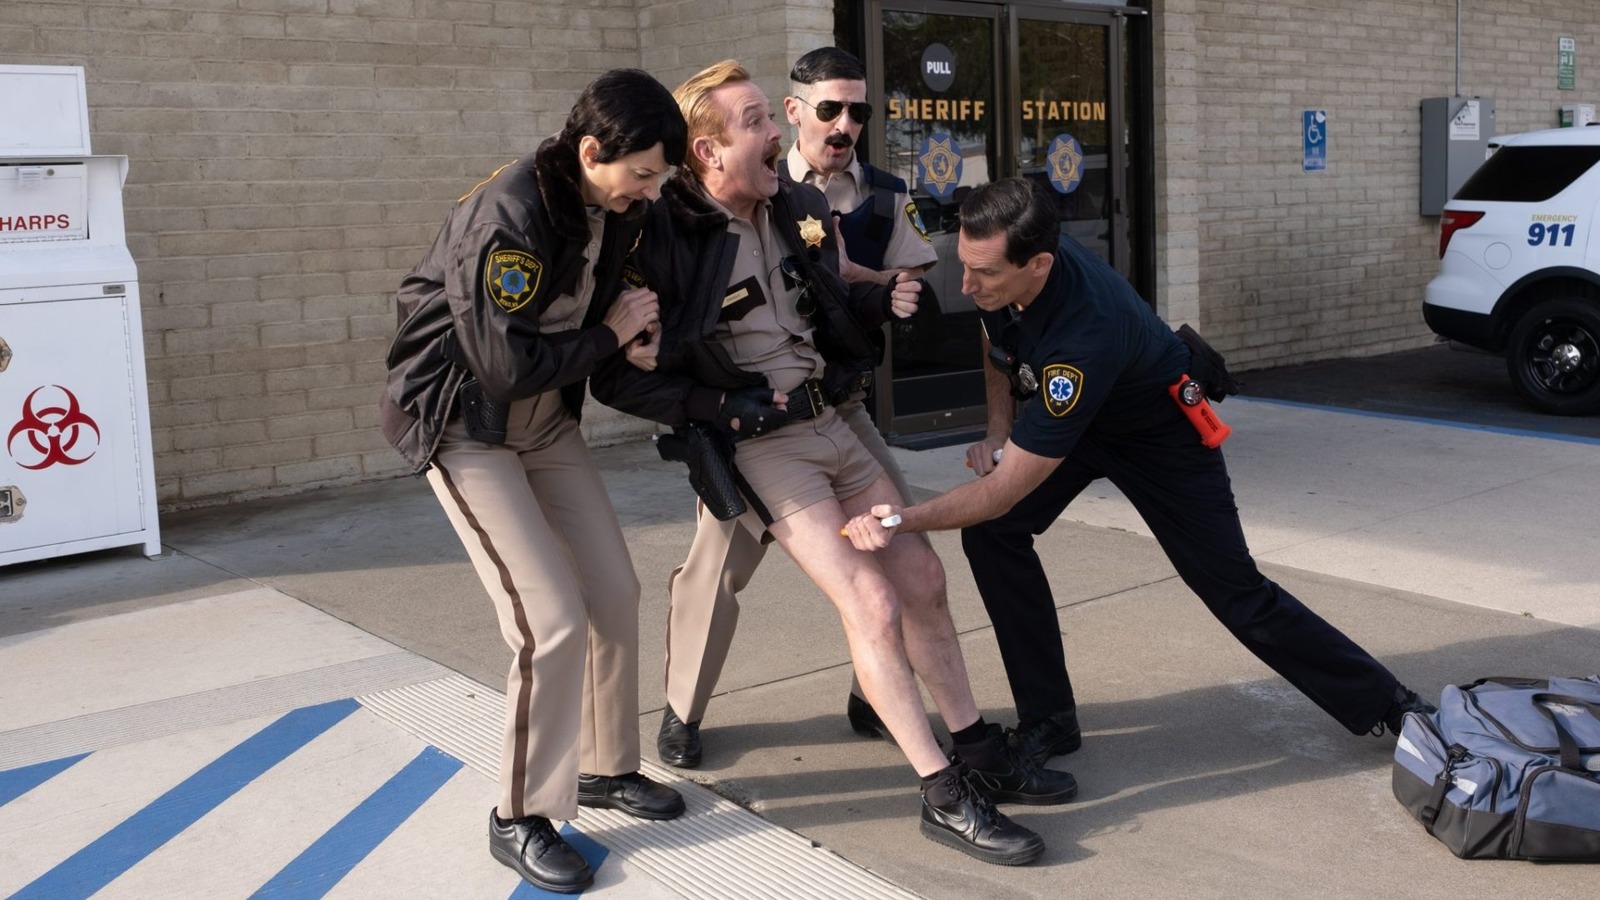 Roku Channel Is The Latest Streamer To Remove Original Programs, Including Reno 911 Revival